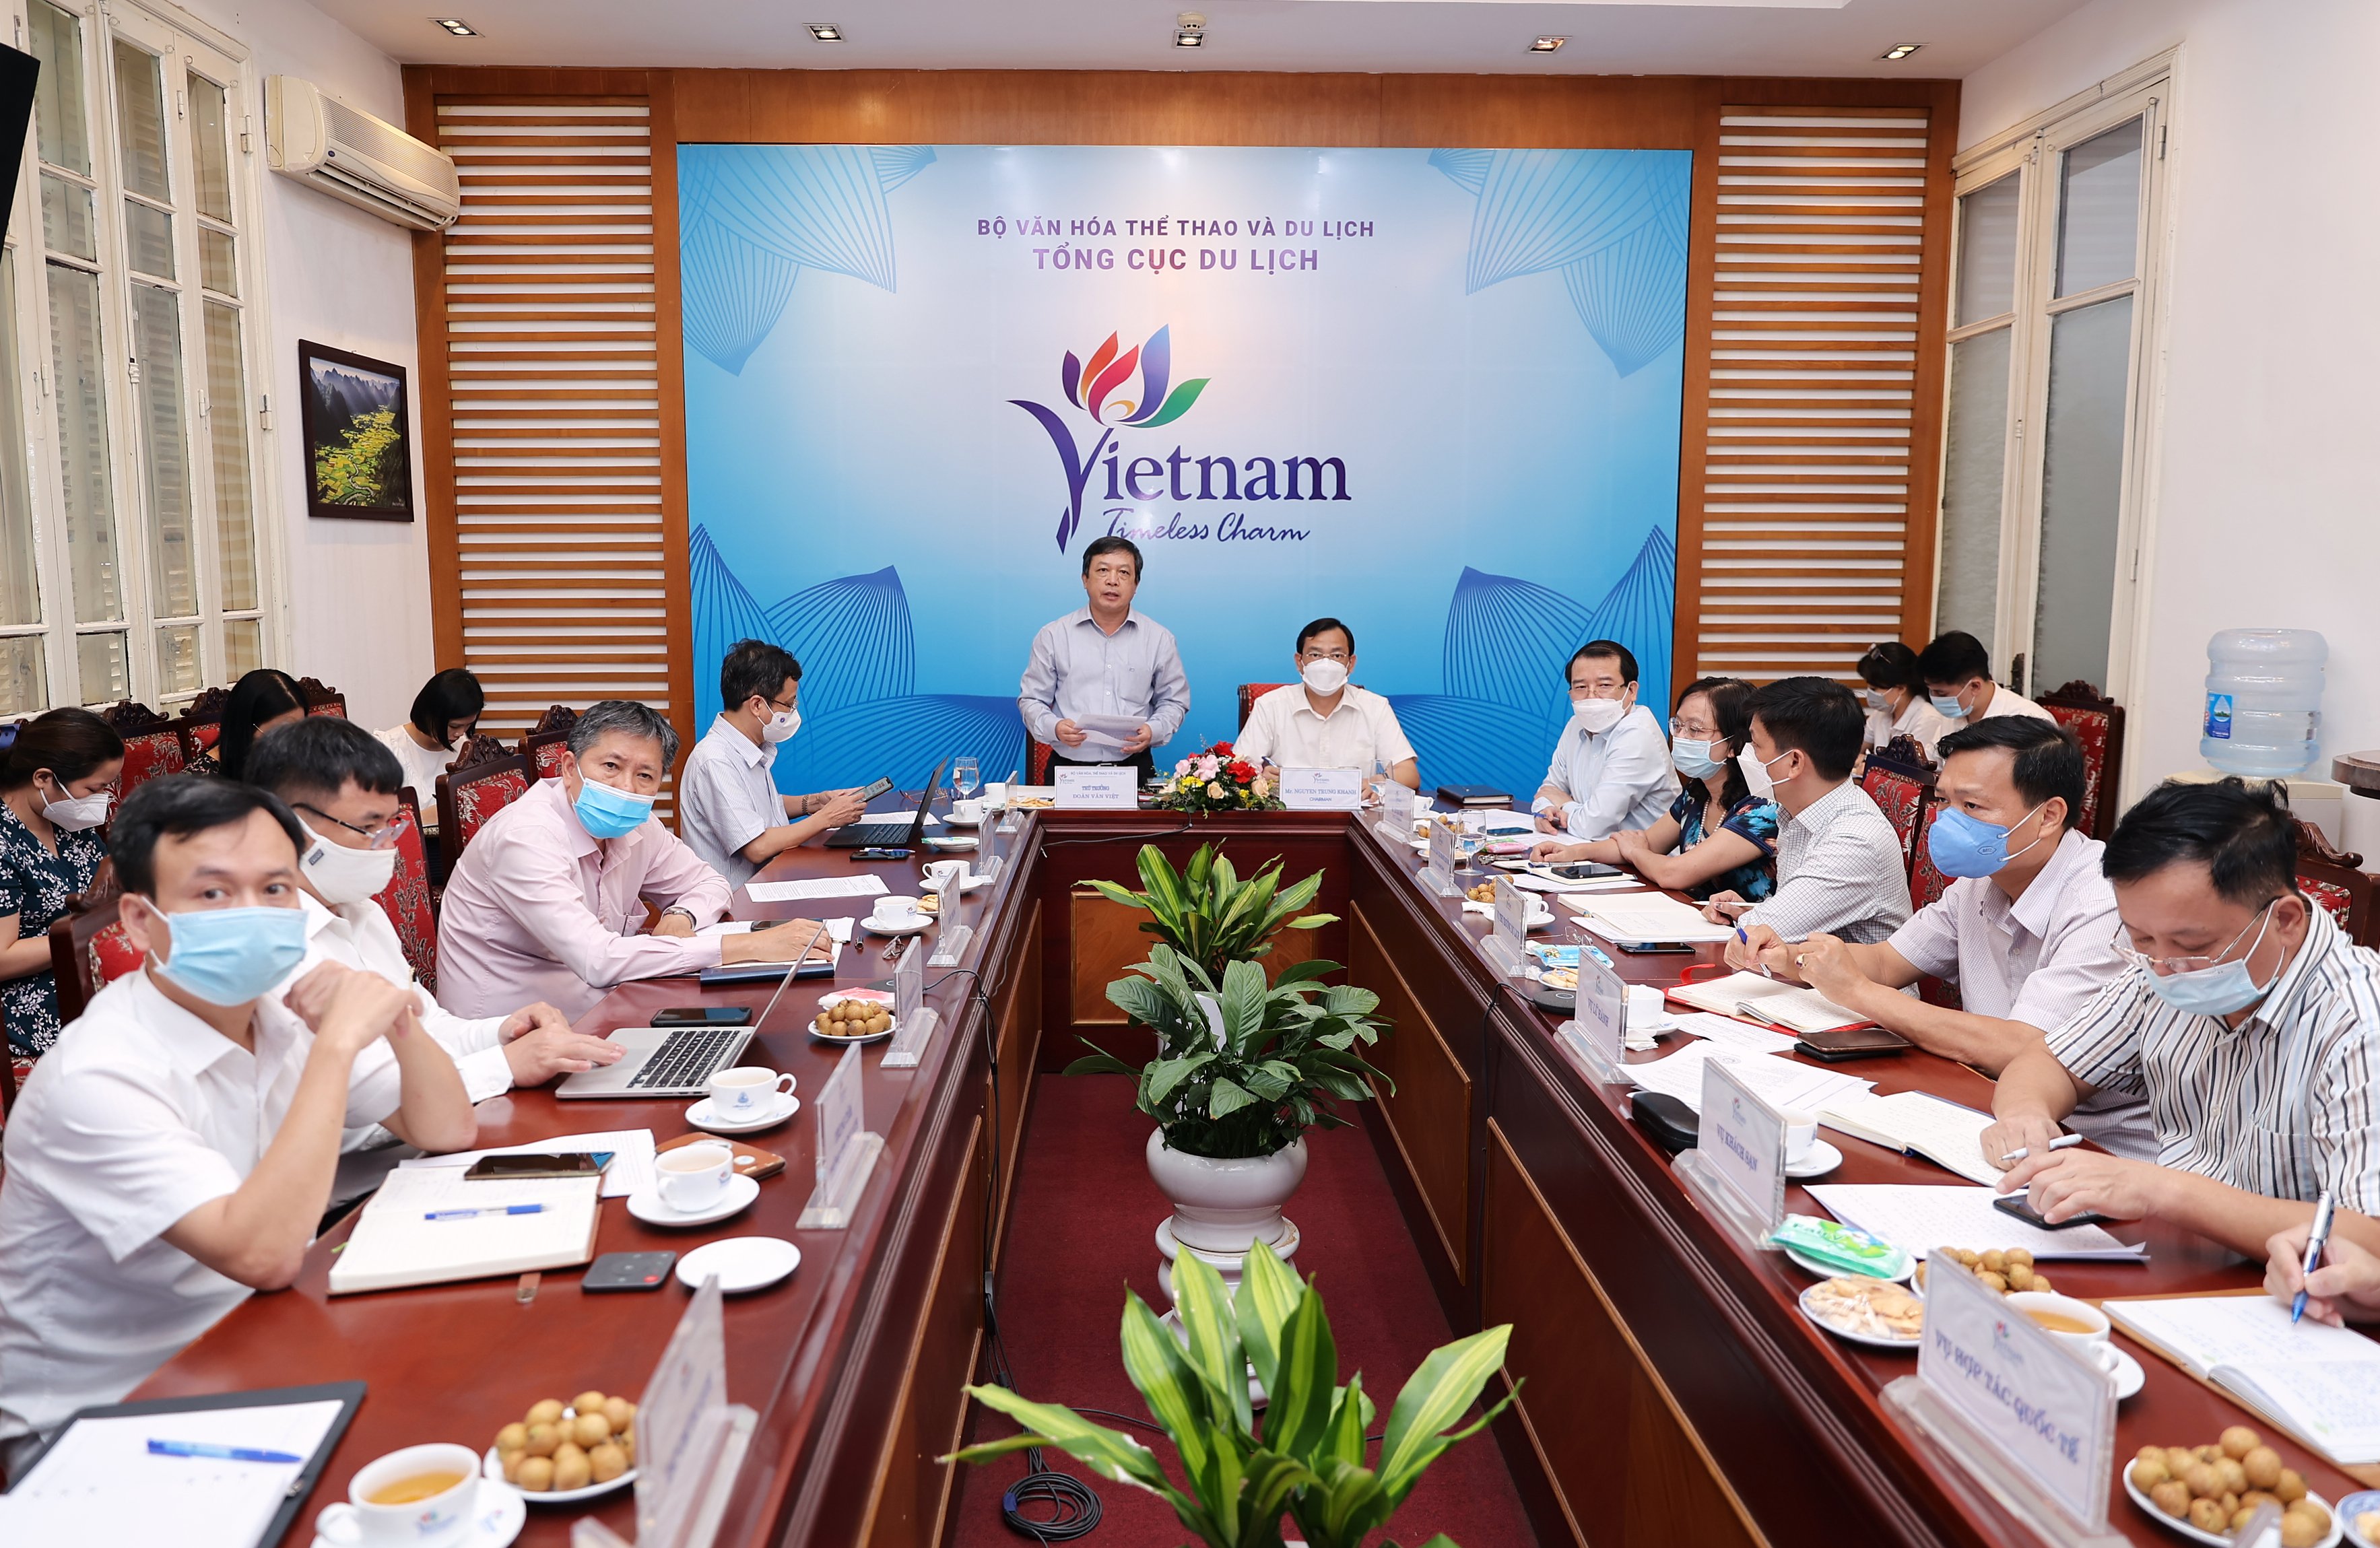 Safety as the foremost priority for restarting Vietnam tourism in the new normal